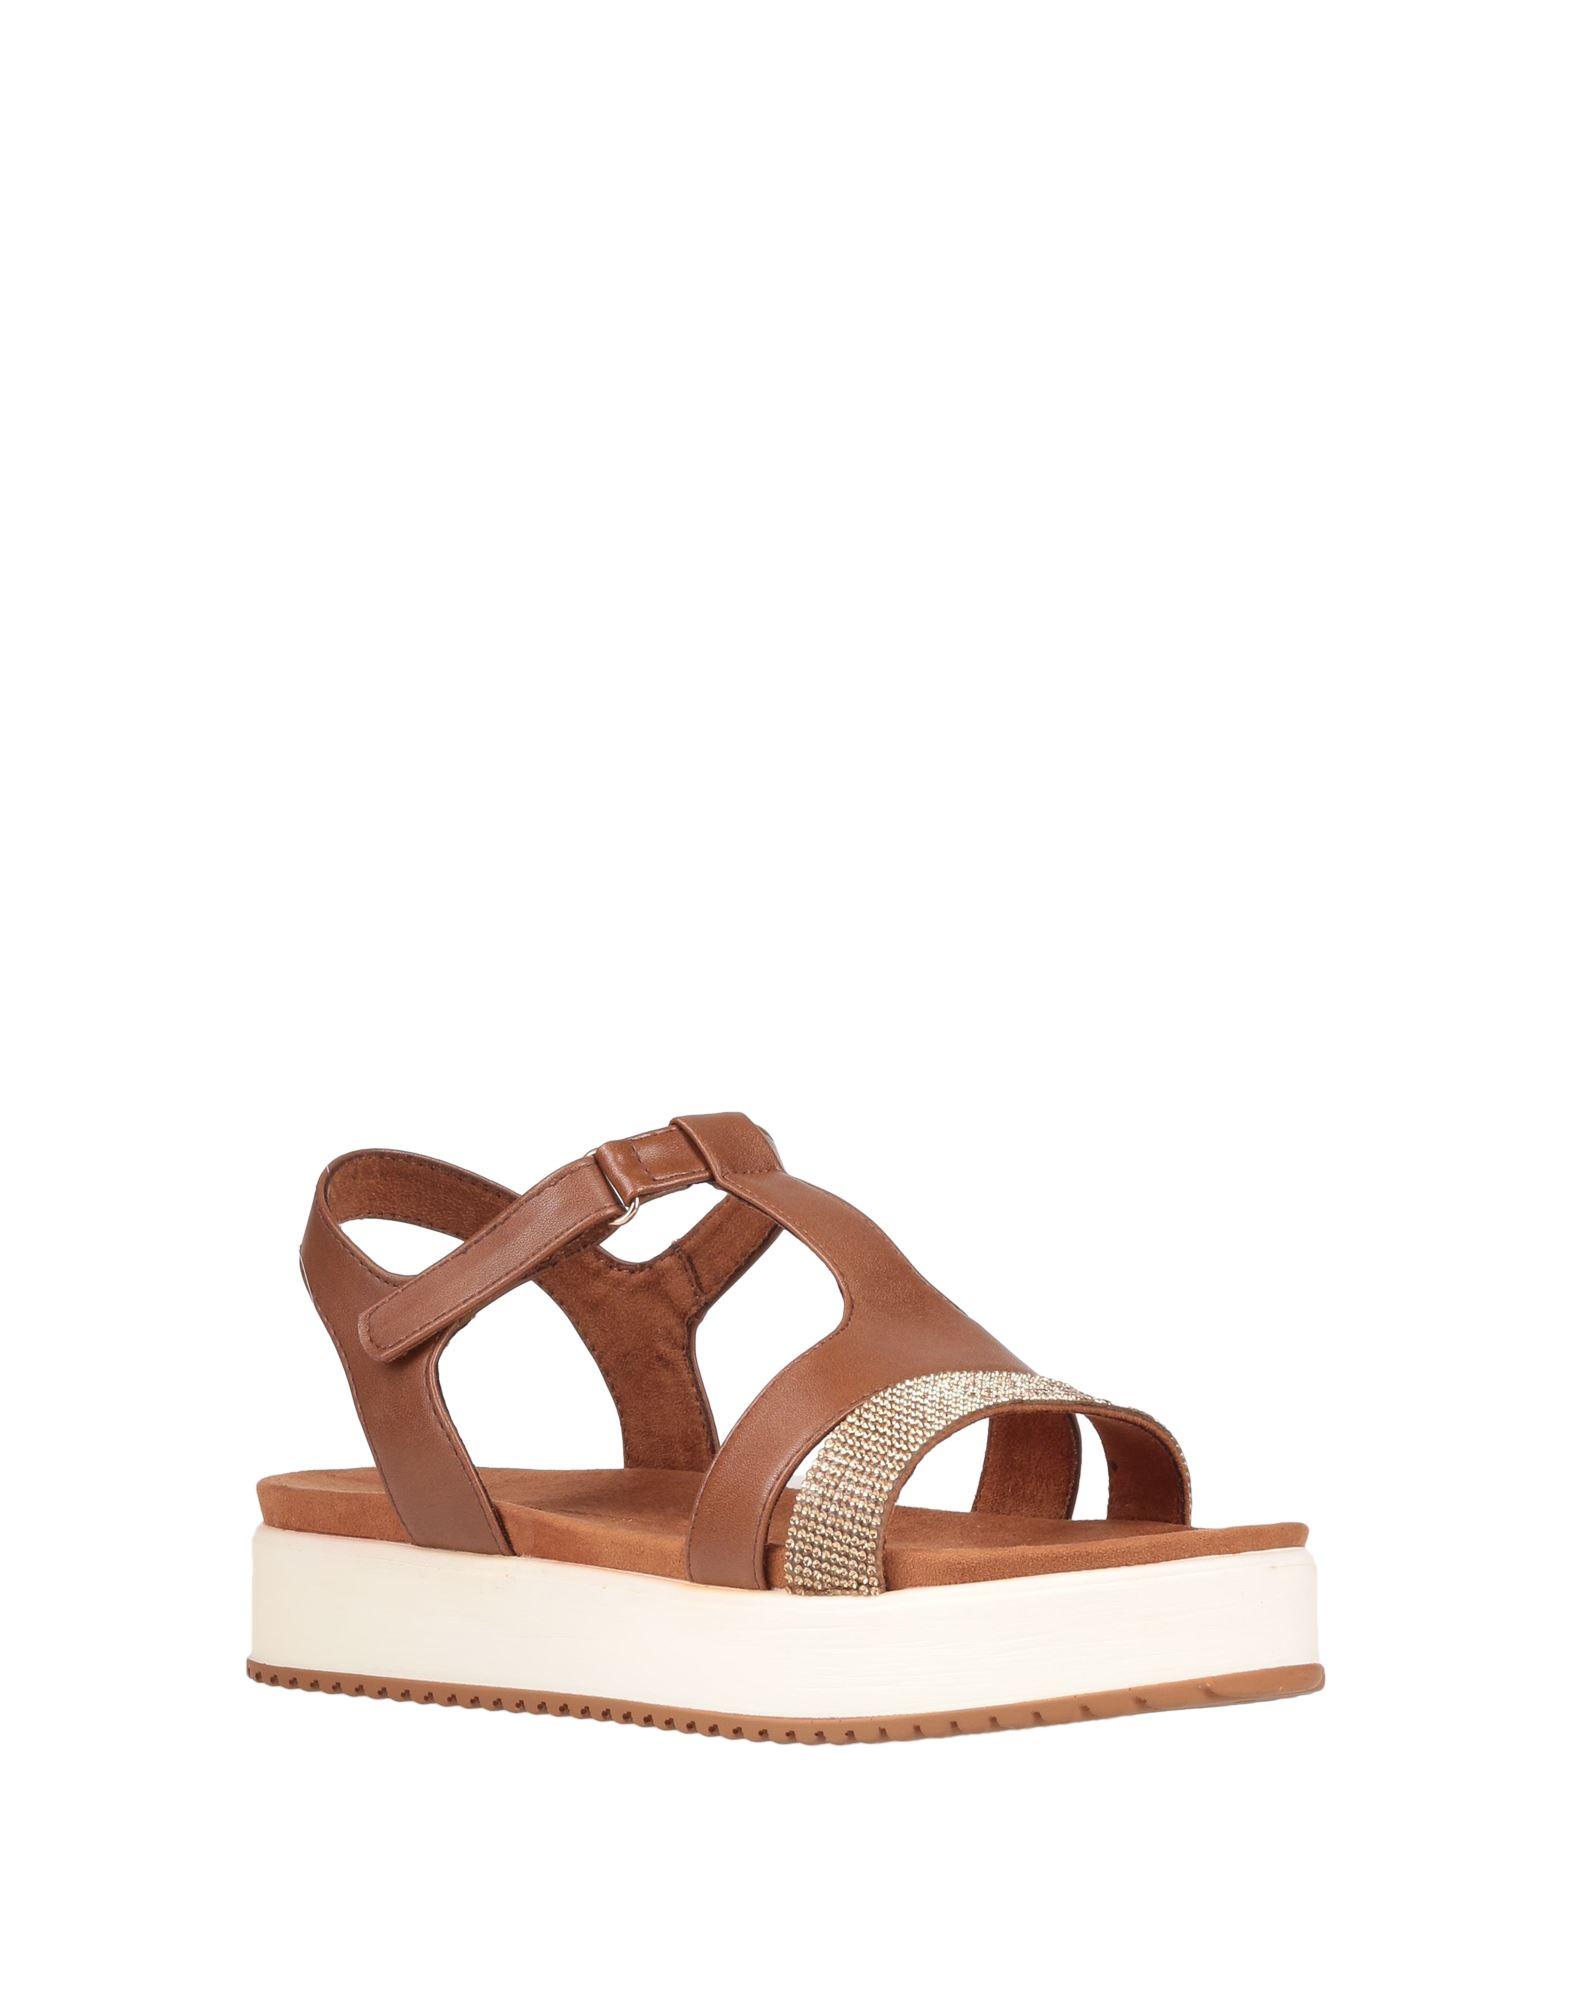 Marco Tozzi Sandals in Brown | Lyst